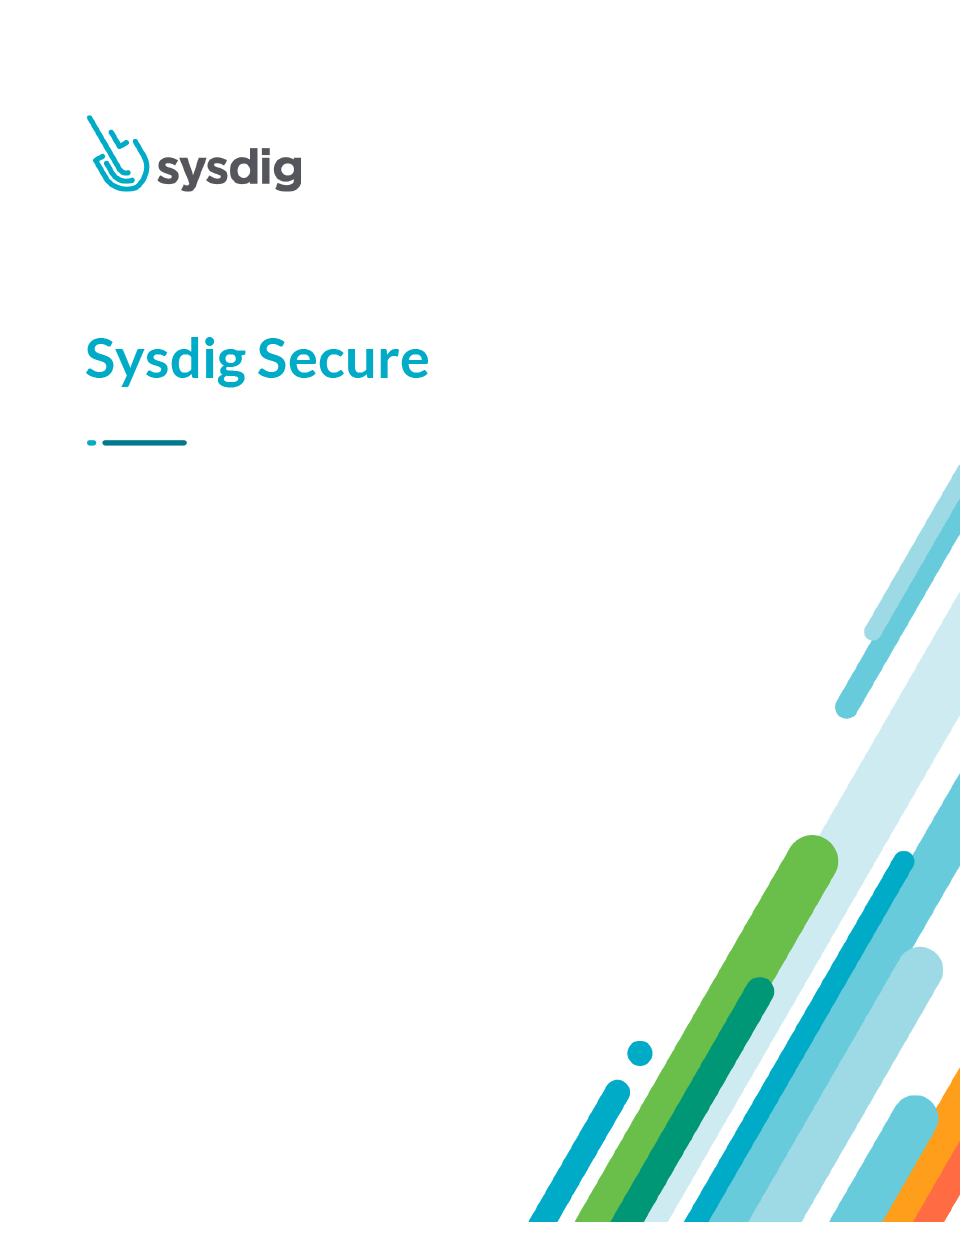 「Sysdig Secure」を公開しました